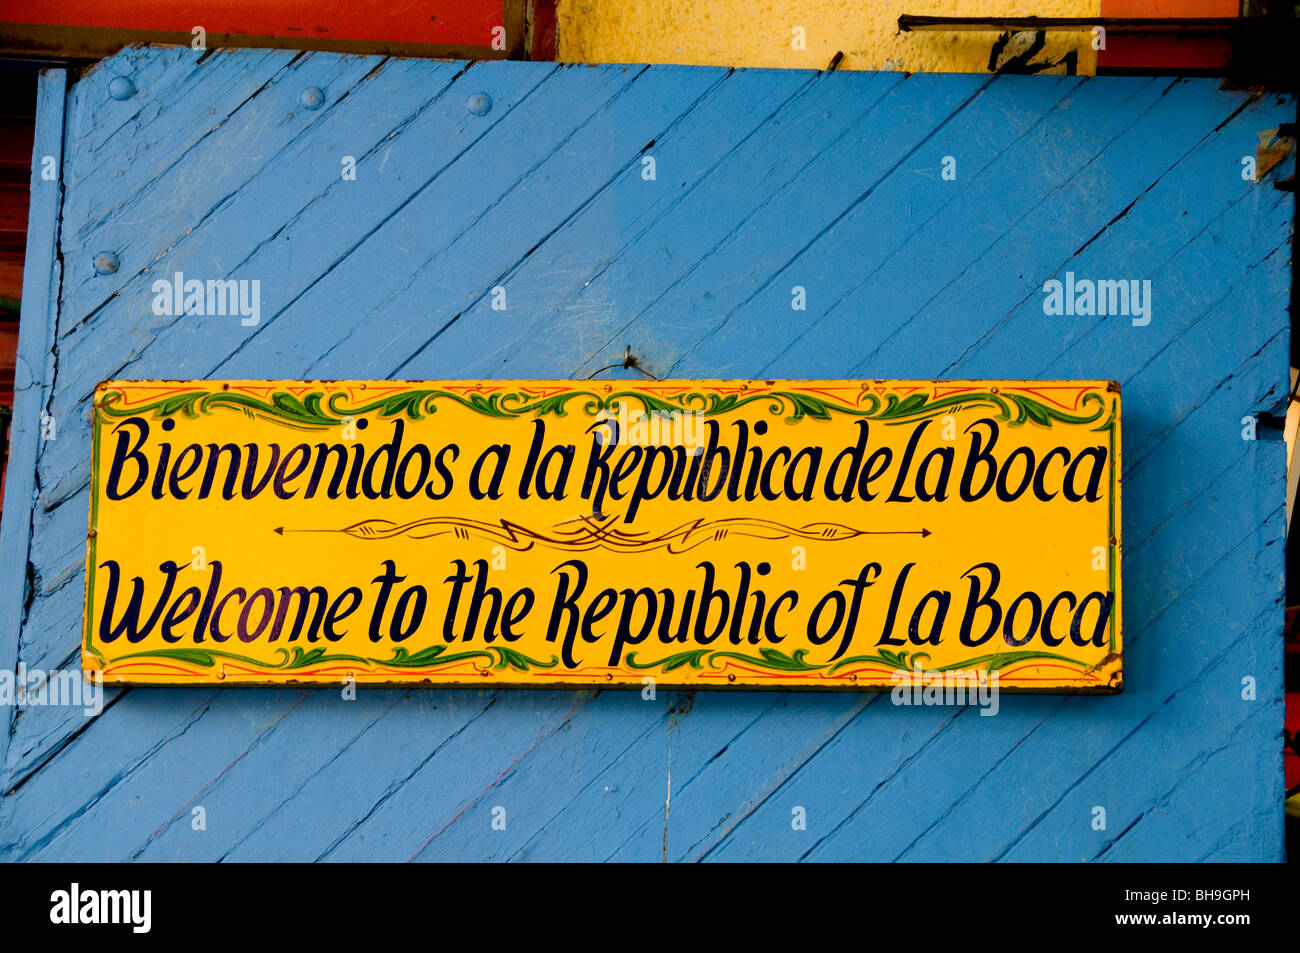 Welcome La boca Buenos Aires Argentina Town City Stock Photo